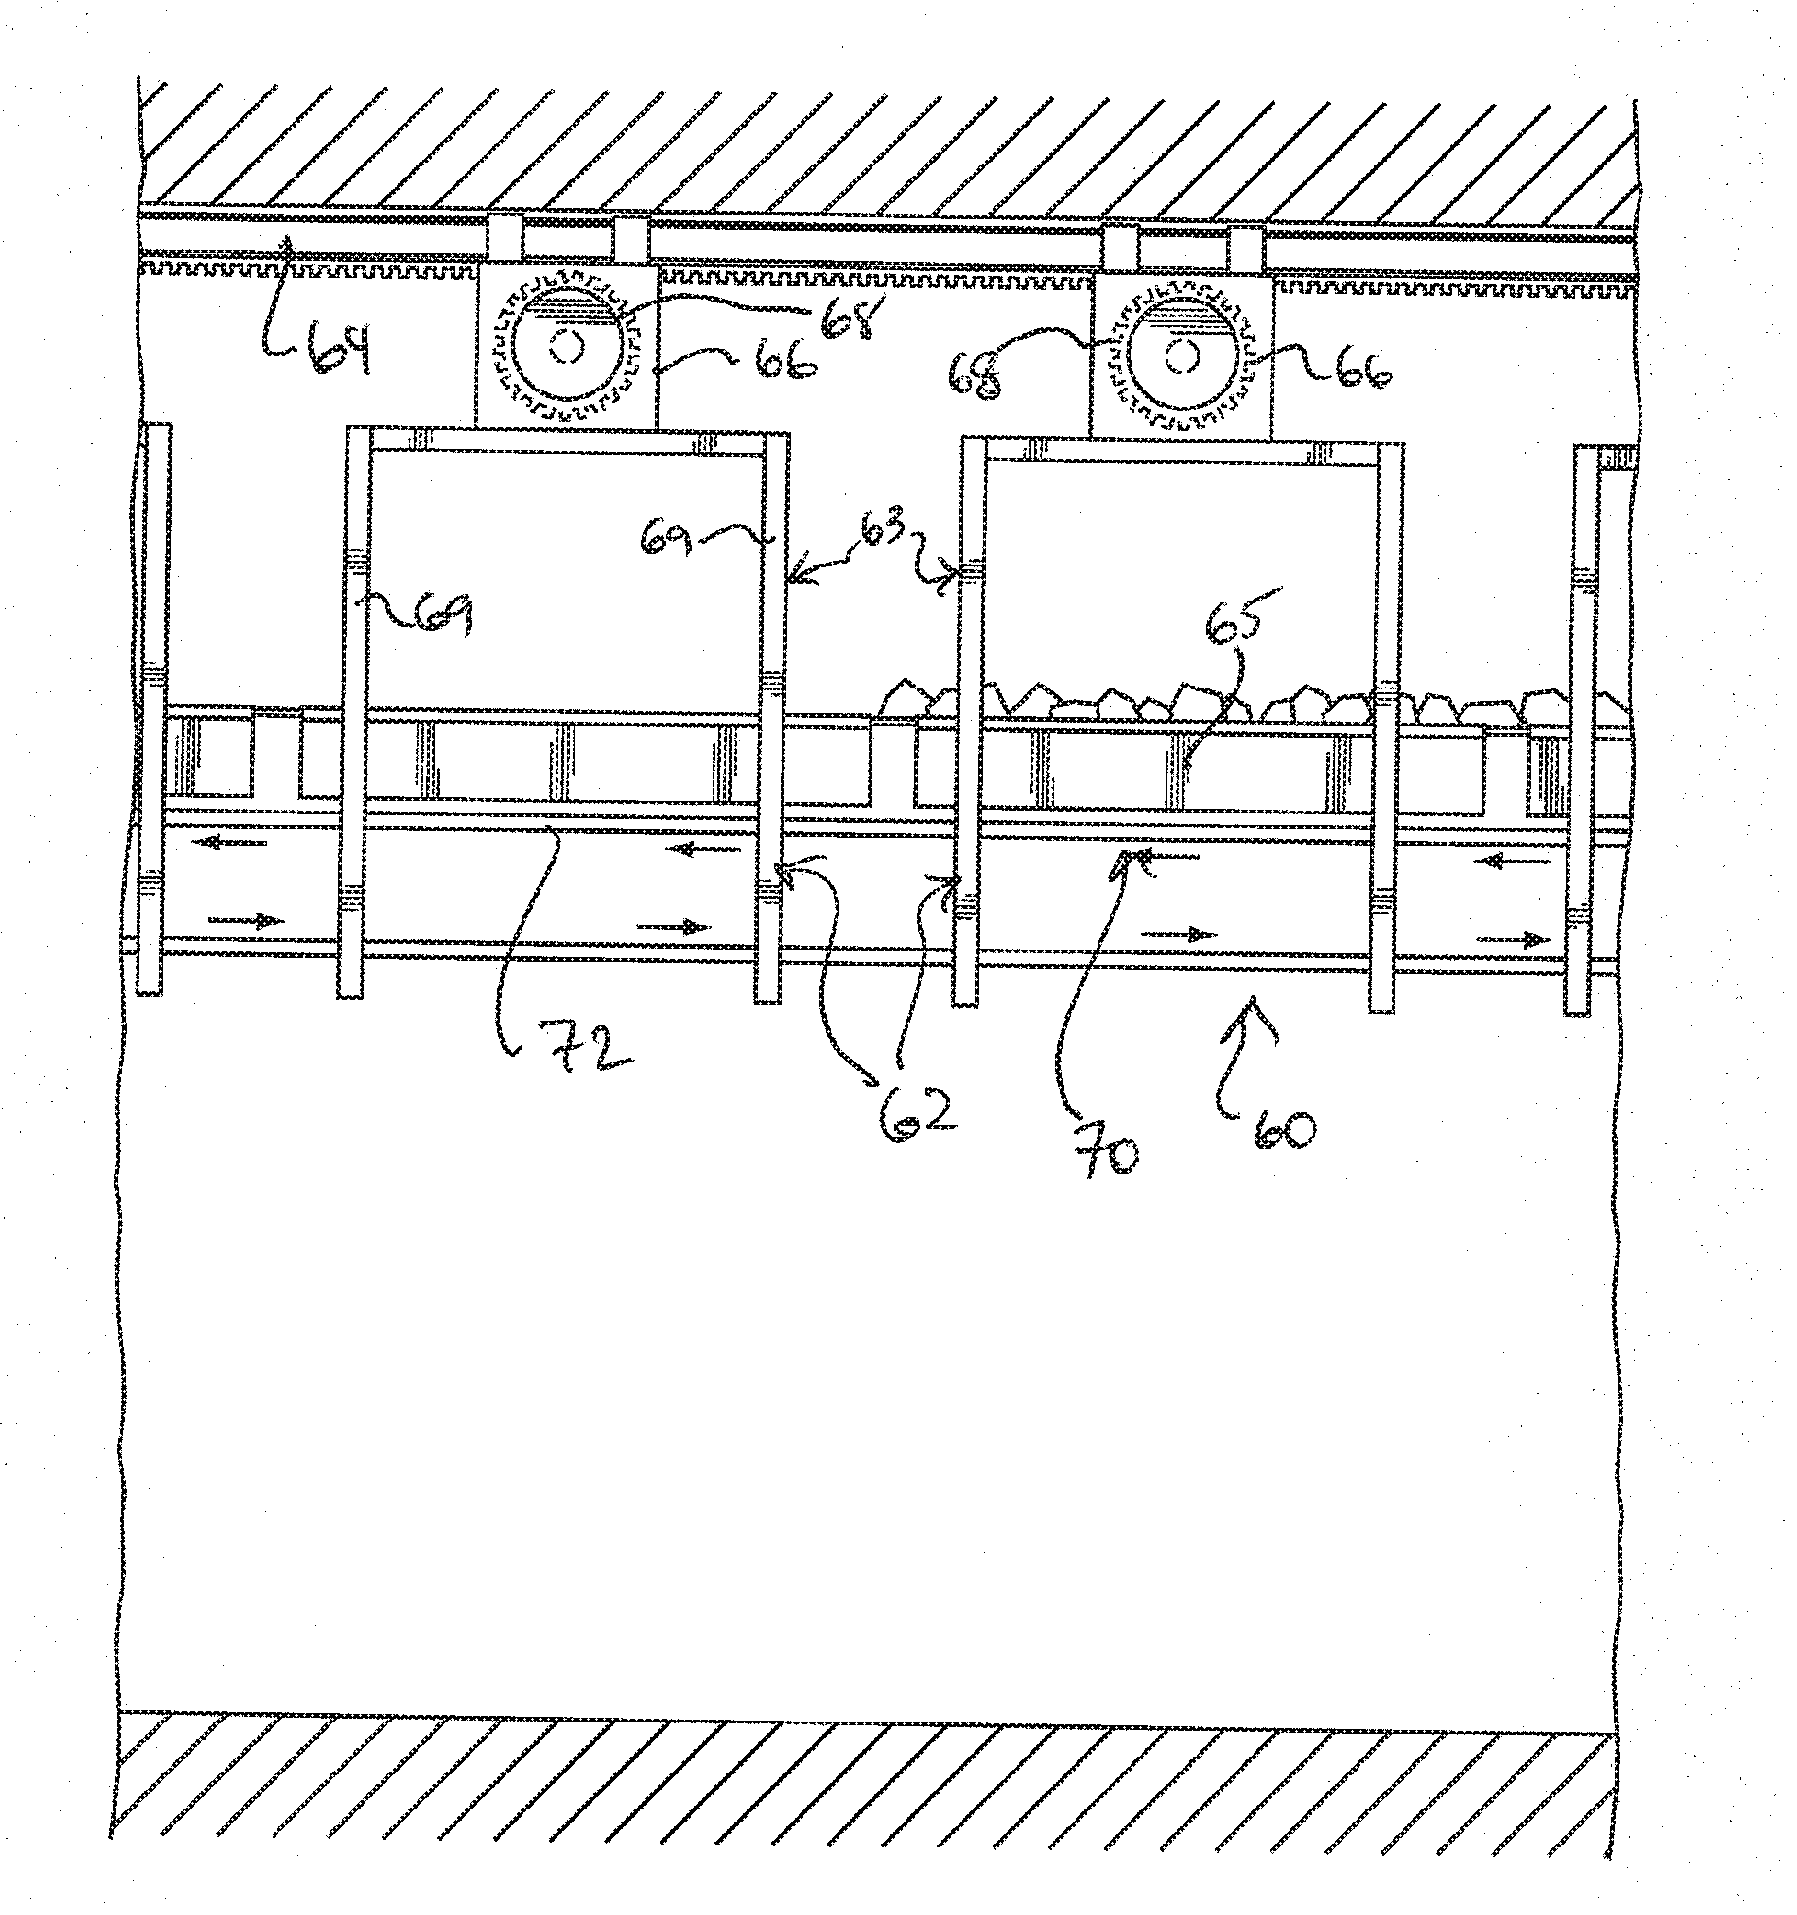 Apparatus, system and method for material extraction in underground hard rock mining